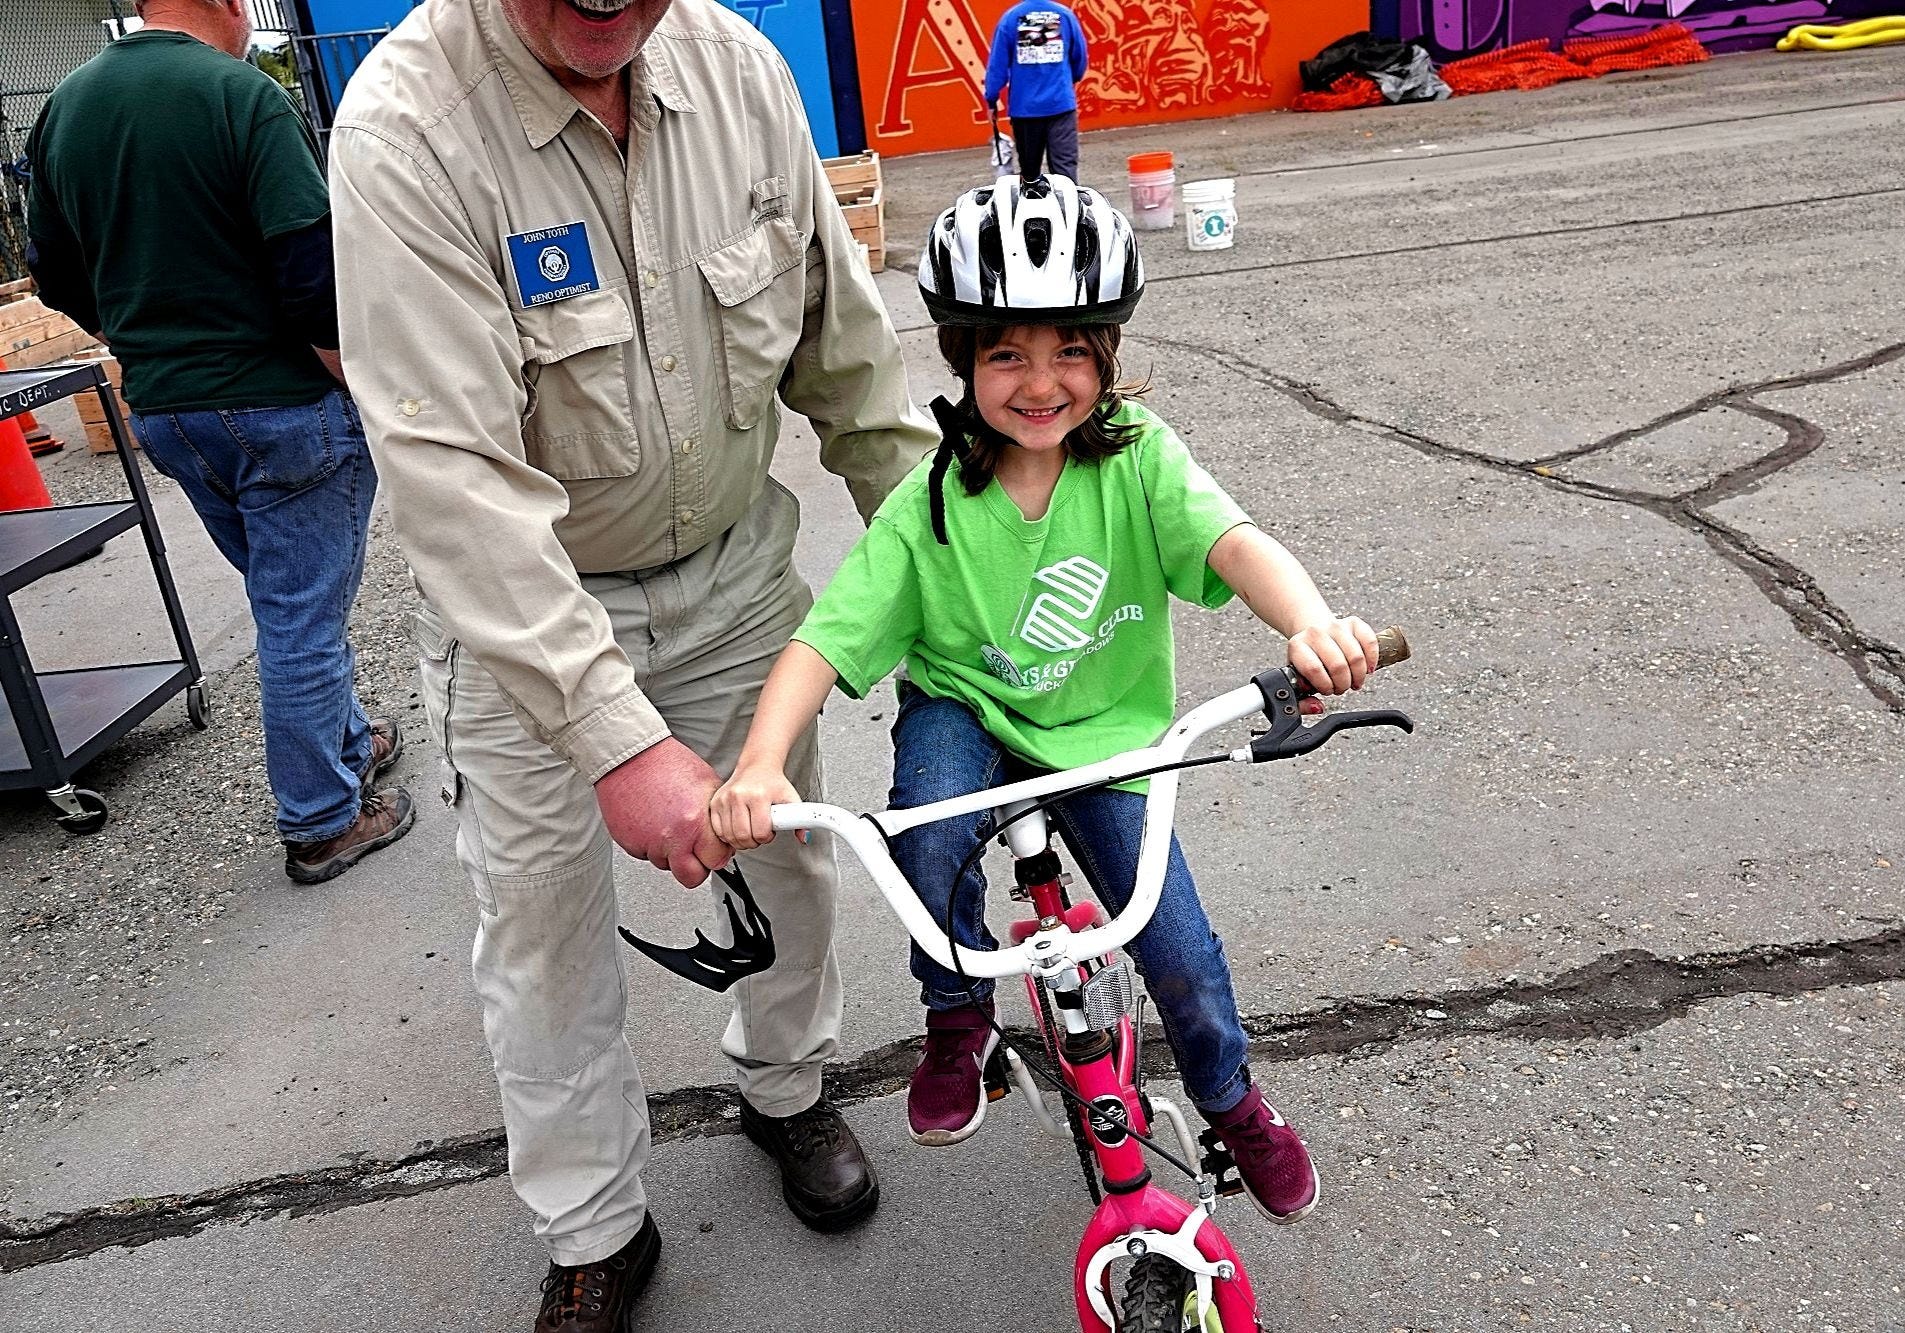 &apos;A need for bike safety&apos;: Reno police, firefighters teach kids the rules of the road